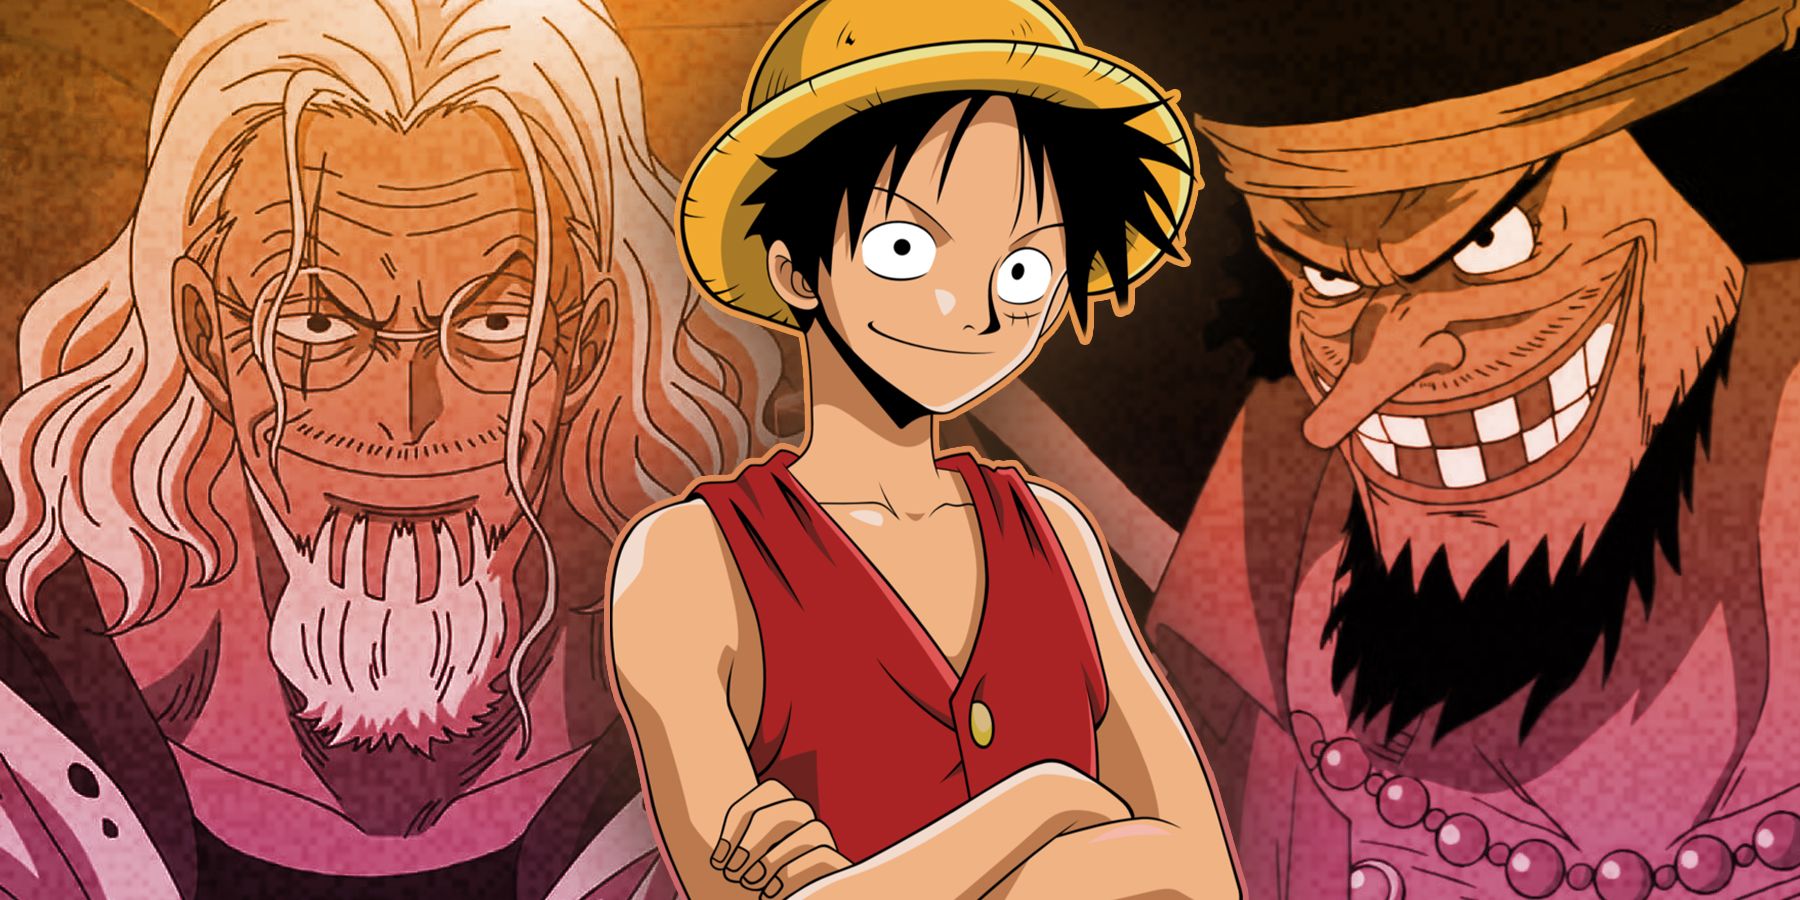 One Piece - Grand Line Bout BETA 3 Character Guide: Straw Hat